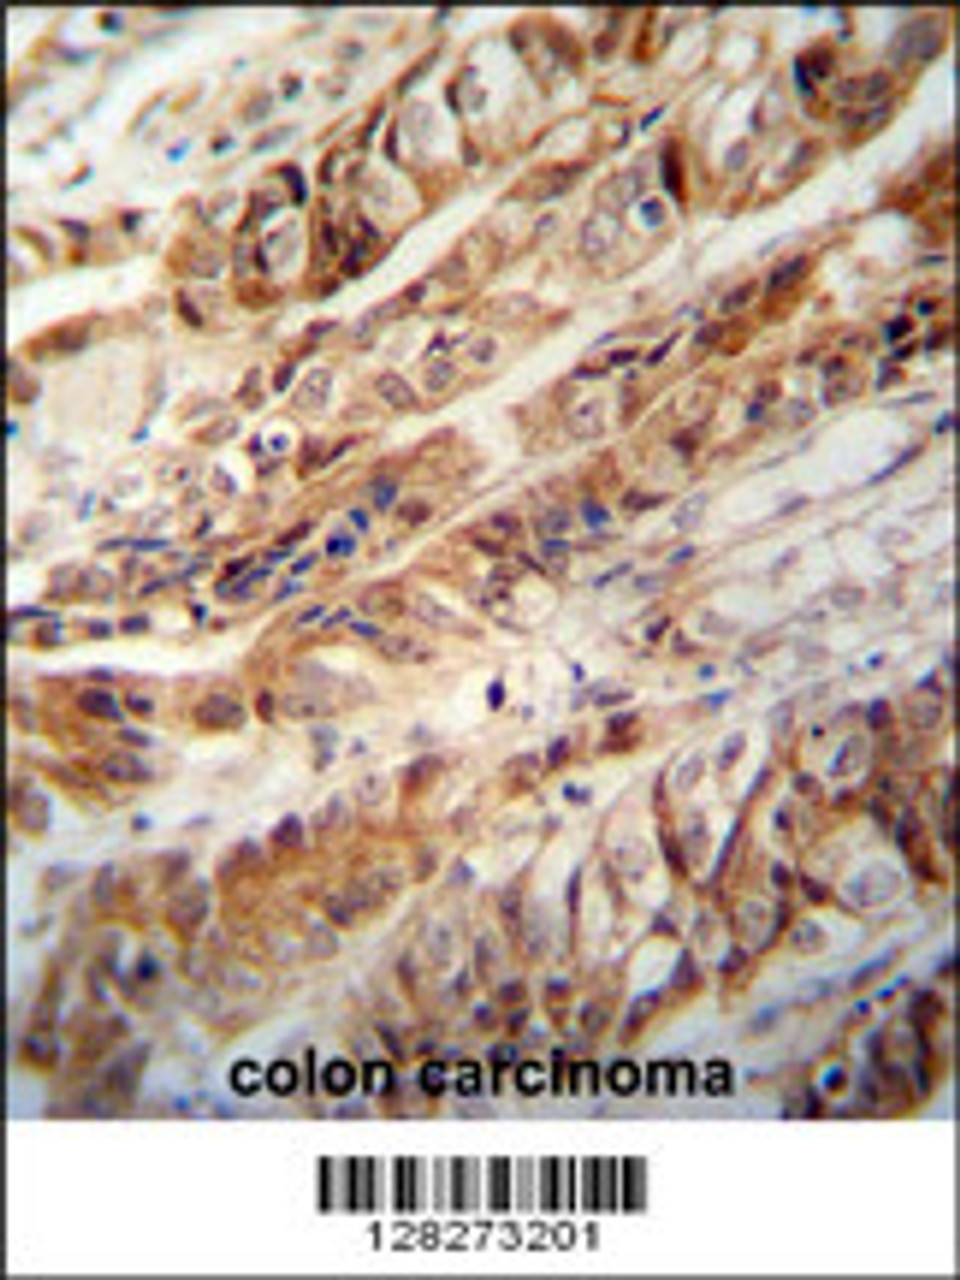 ZC3H15 antibody immunohistochemistry analysis in formalin fixed and paraffin embedded human colon carcinoma followed by peroxidase conjugation of the secondary antibody and DAB staining.